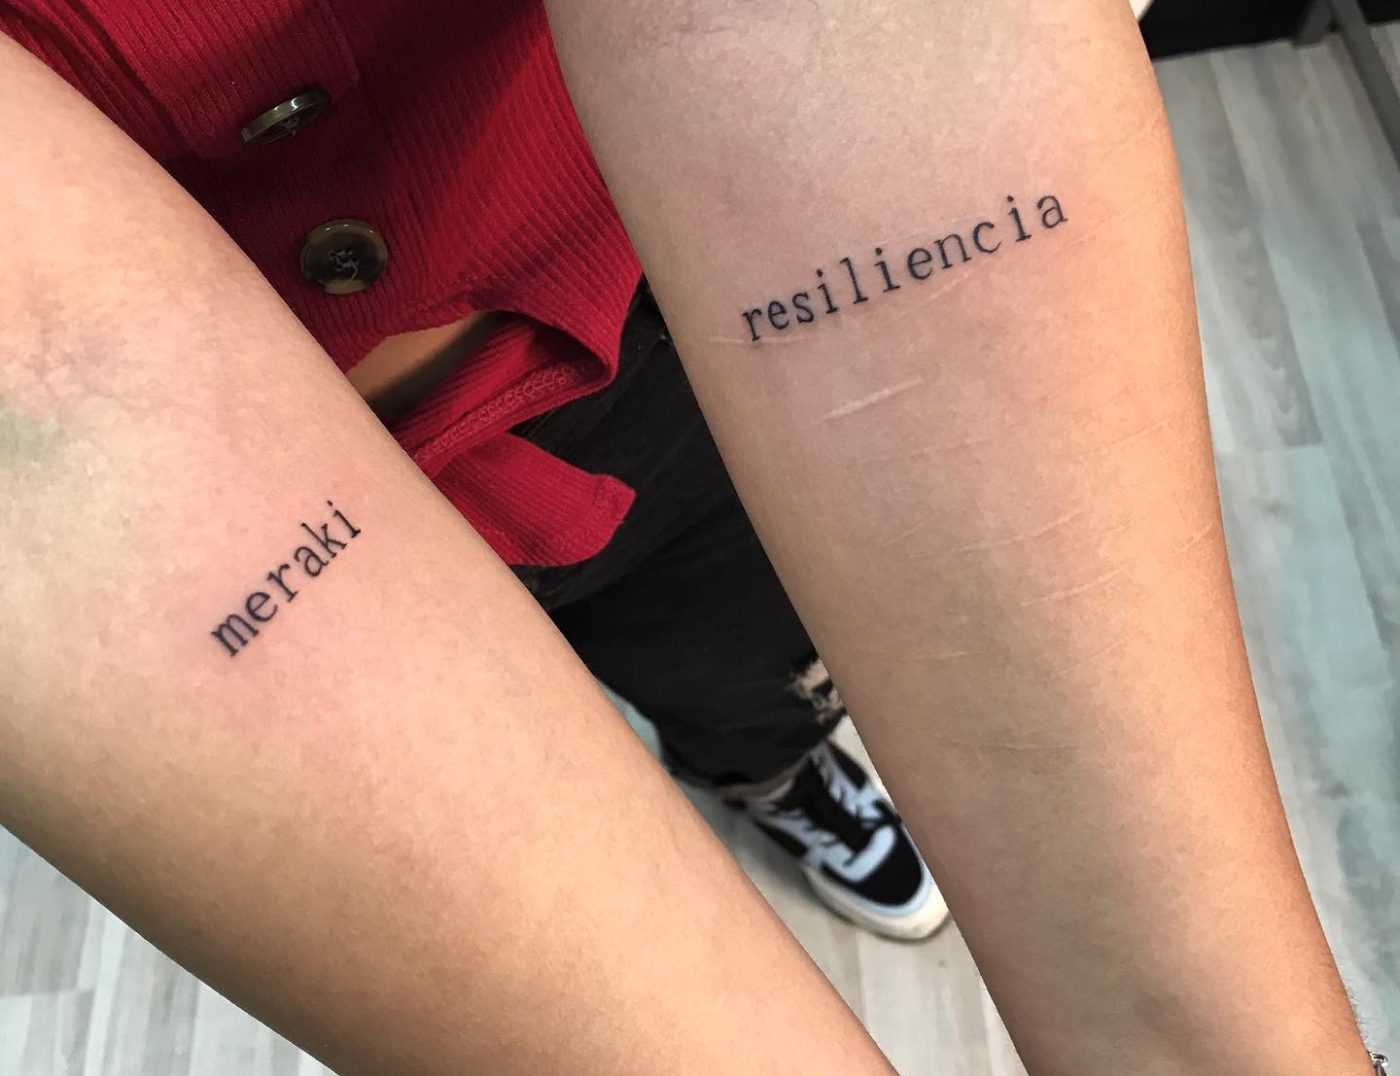 "Meraki Resiliencia" Blackwork Lettering Tattoo In Spanish By Rene Cristobal. The Meraki tattoo is a combination of two Greek words: “Meraki” and “Makari.” Meraki is a means "to do something with soul, creativity, or love" while Makari is a "means to make something beautiful." Iron Palm tattoos is open late night until 2AM. Stop by for a free consultation. Walk ins are welcome.